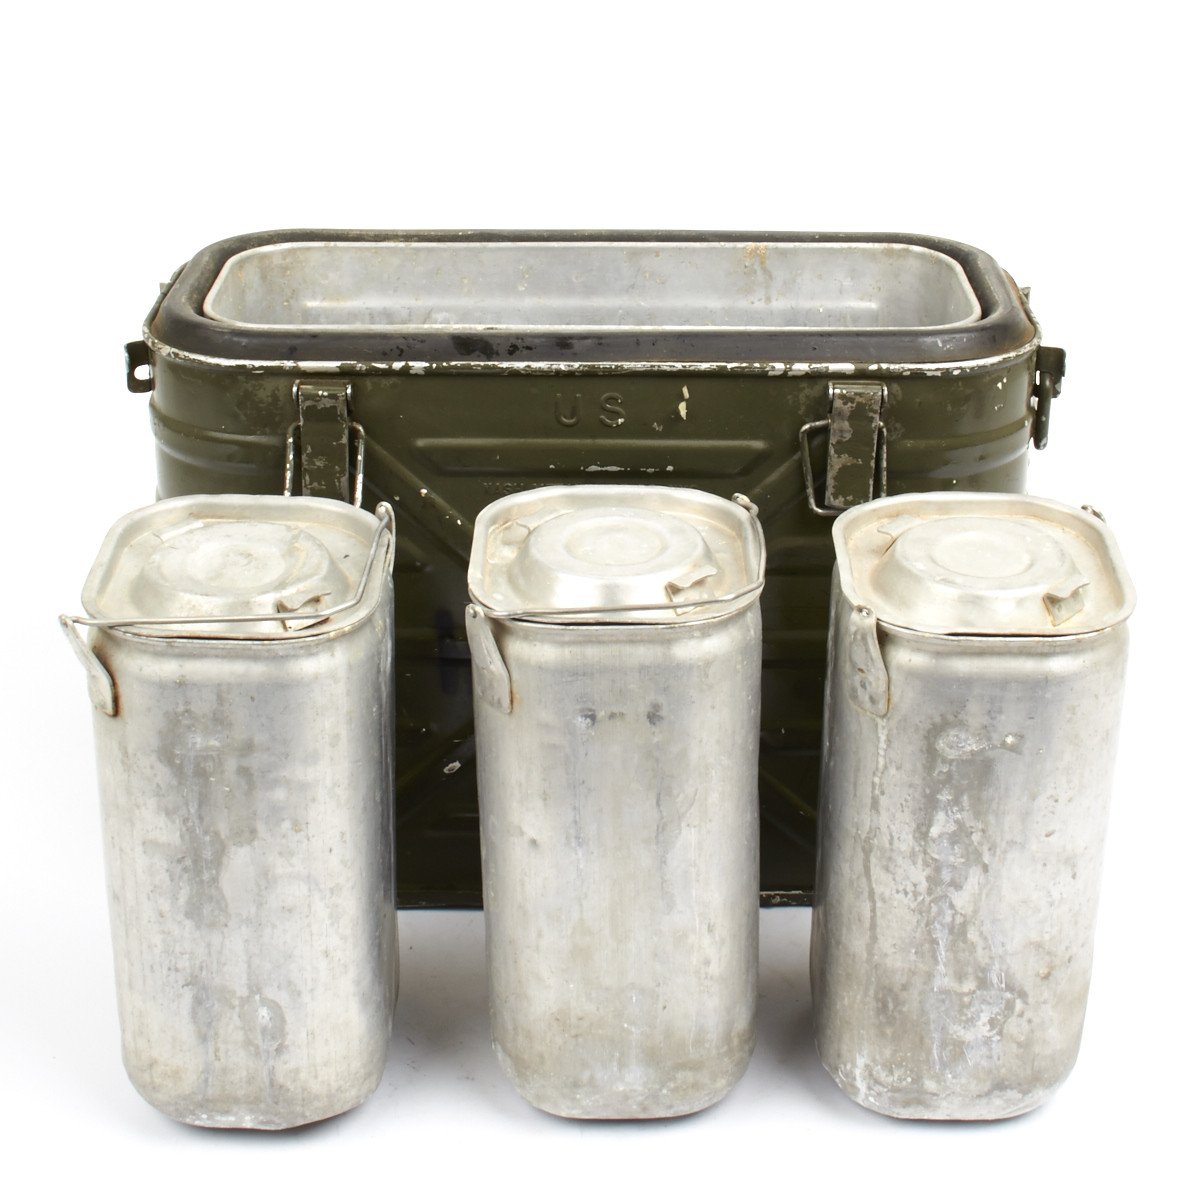 French Military Insulated Hot/Cold Food Transport Container